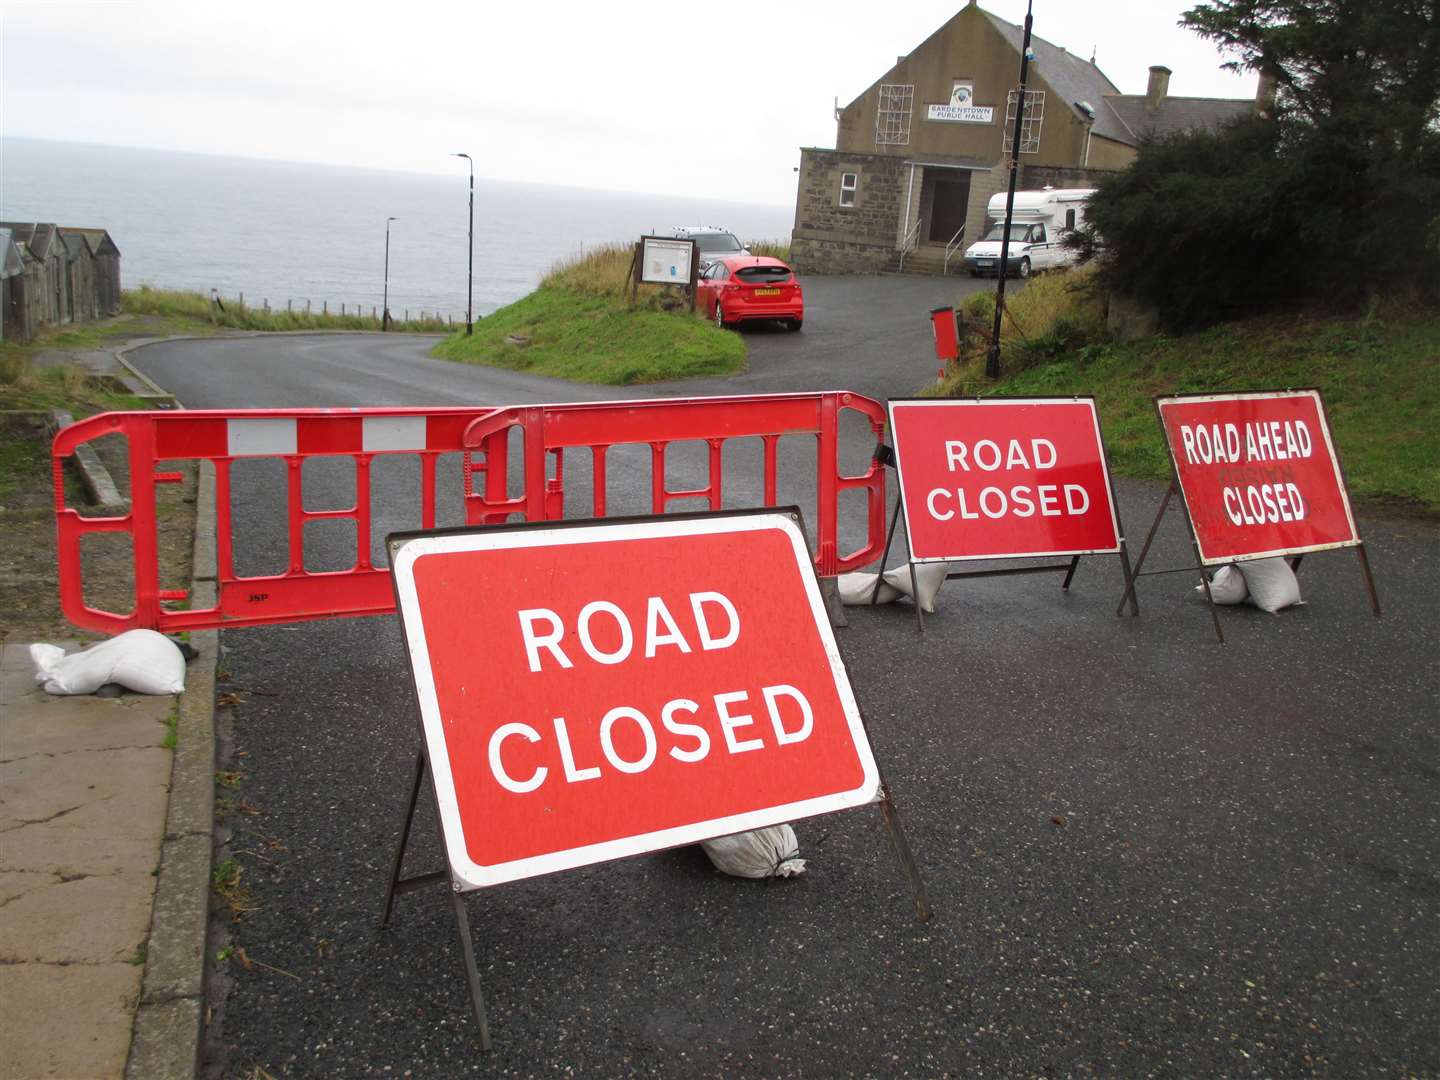 The road through the lower part of Gardenstown was closed at the village's public hall.